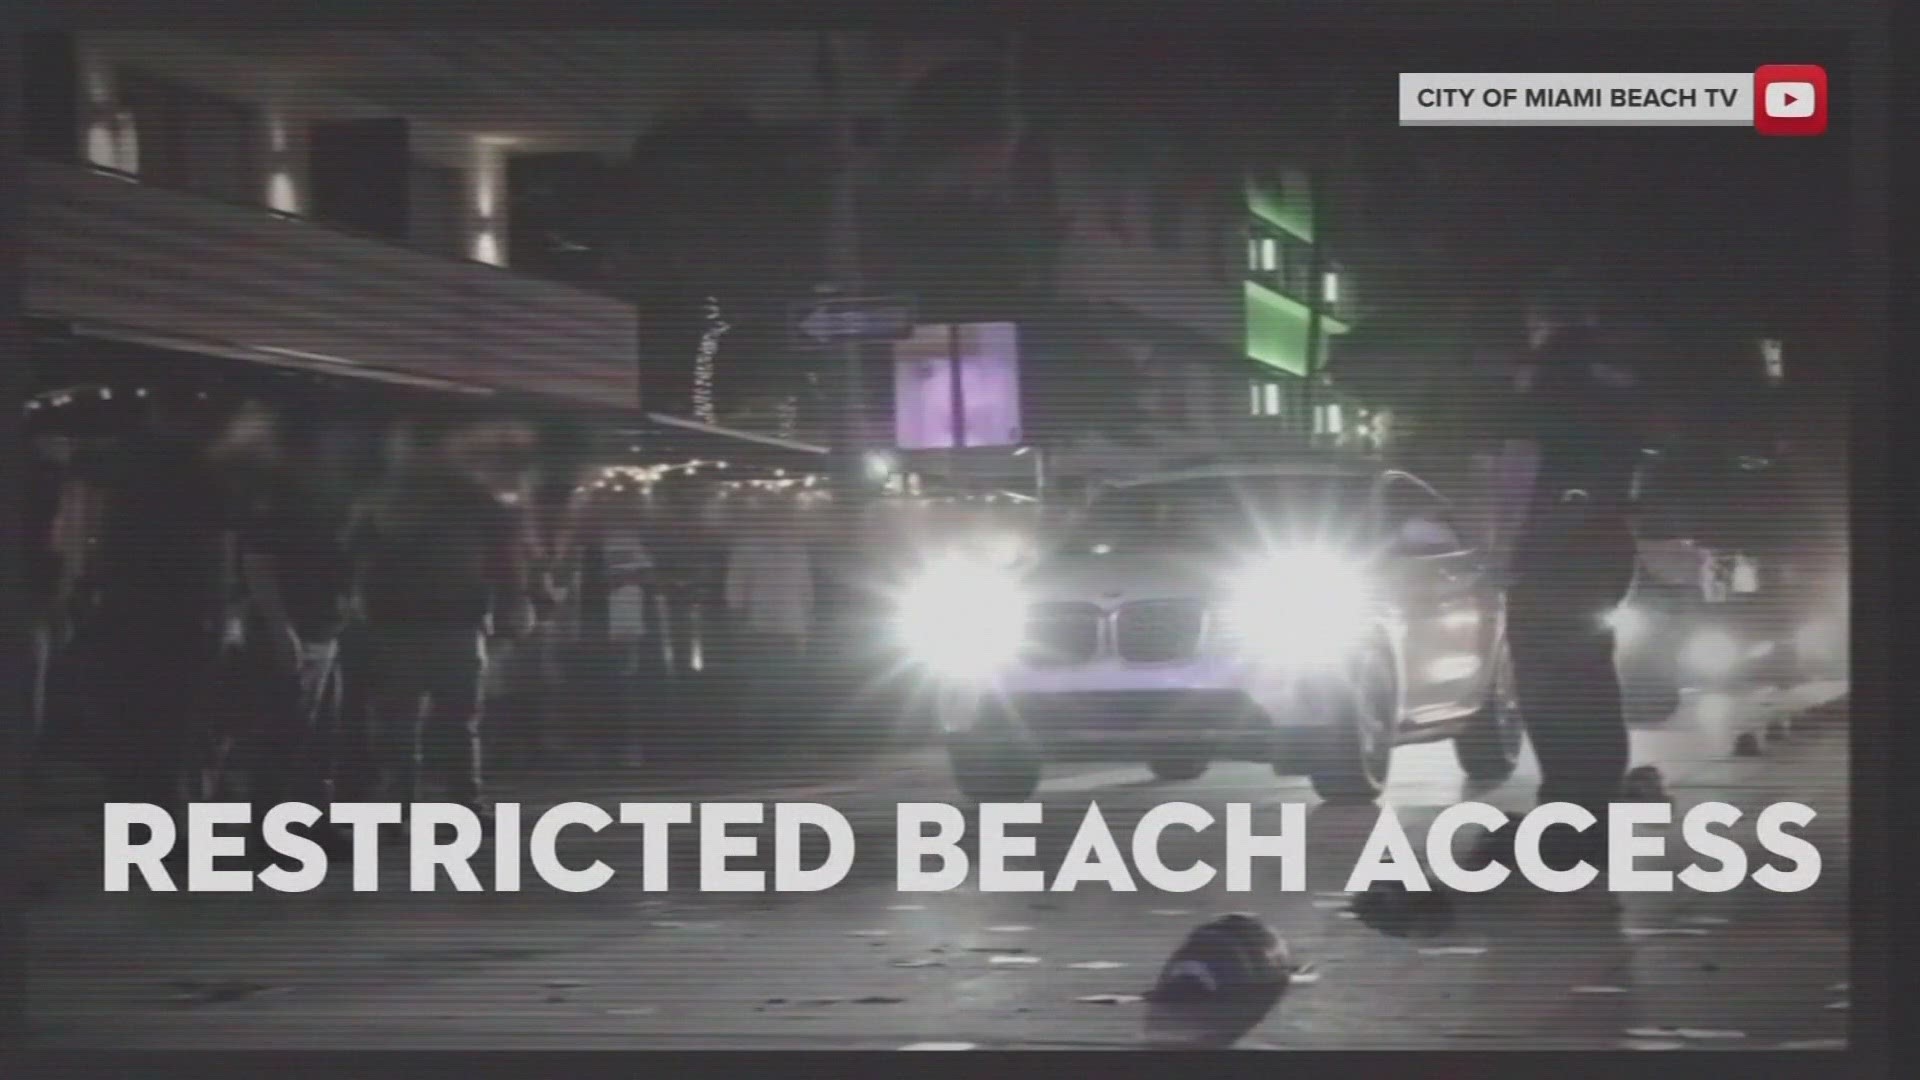 After violence and disruptive behavior in Miami Beach last year, city officials are making big moves to keep the city safe during Spring Break.